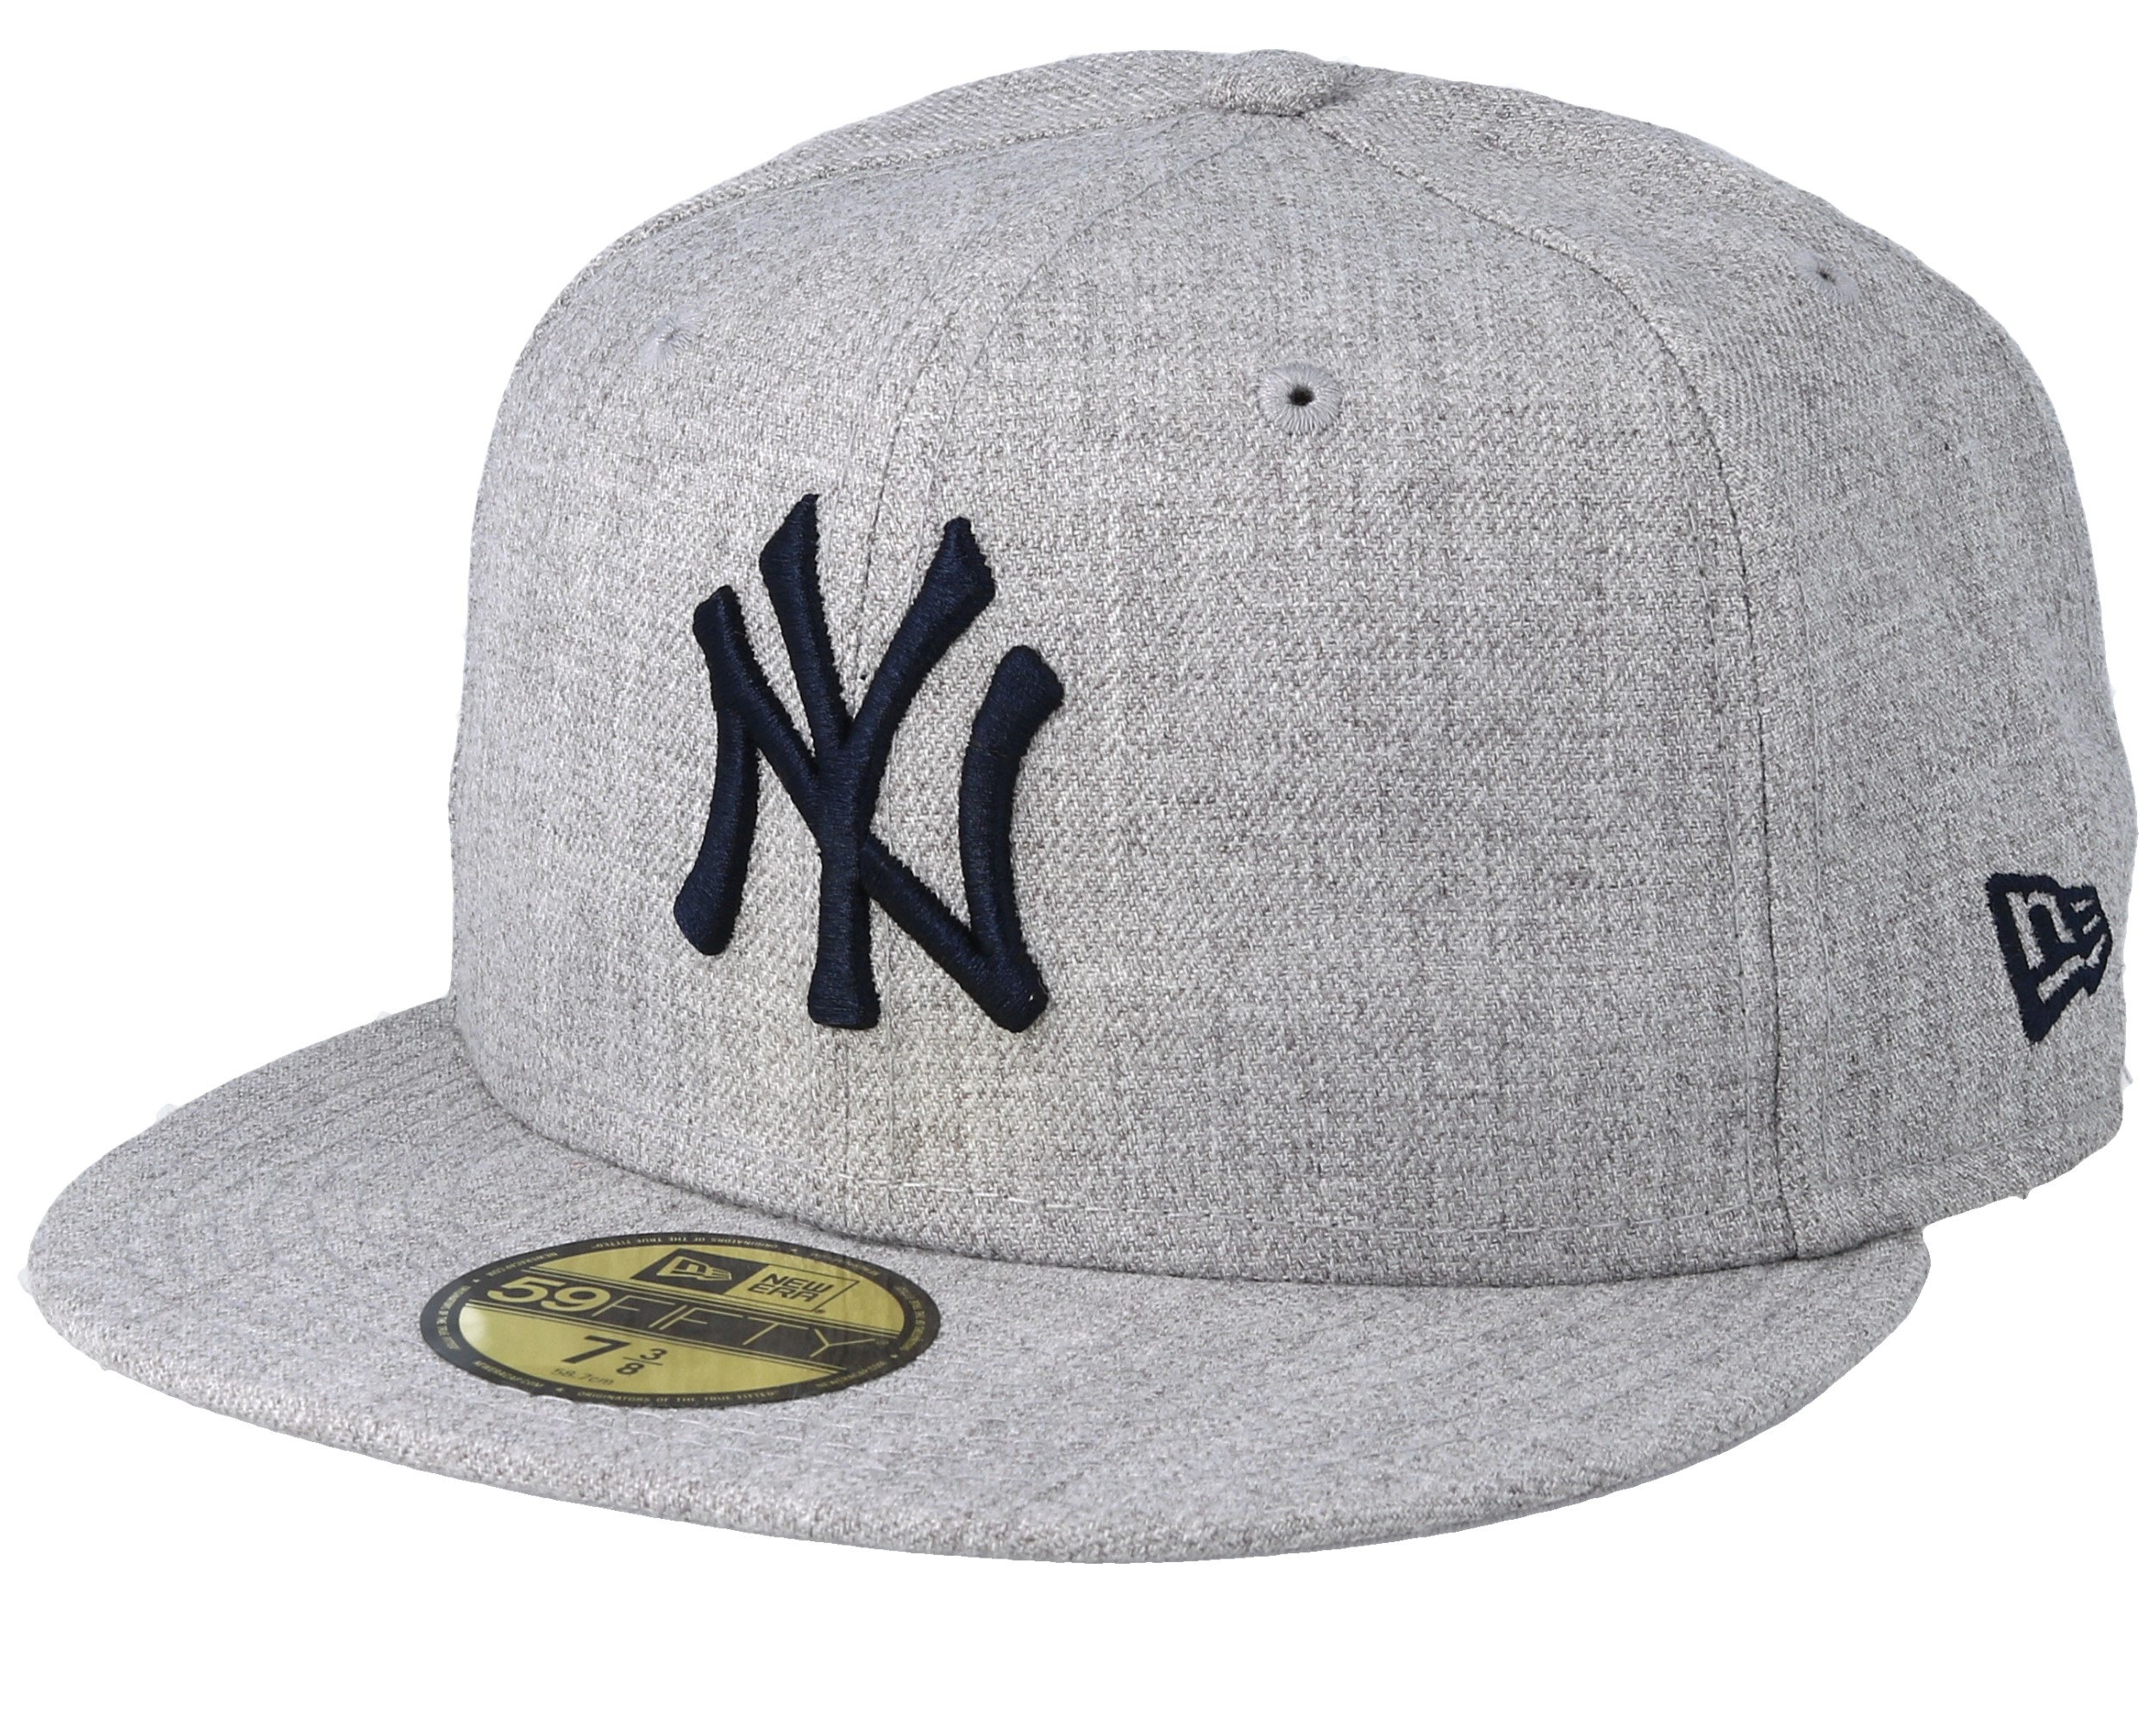 Yankees Gray/Navy - York New Fitted New Era cap Heather 59Fifty